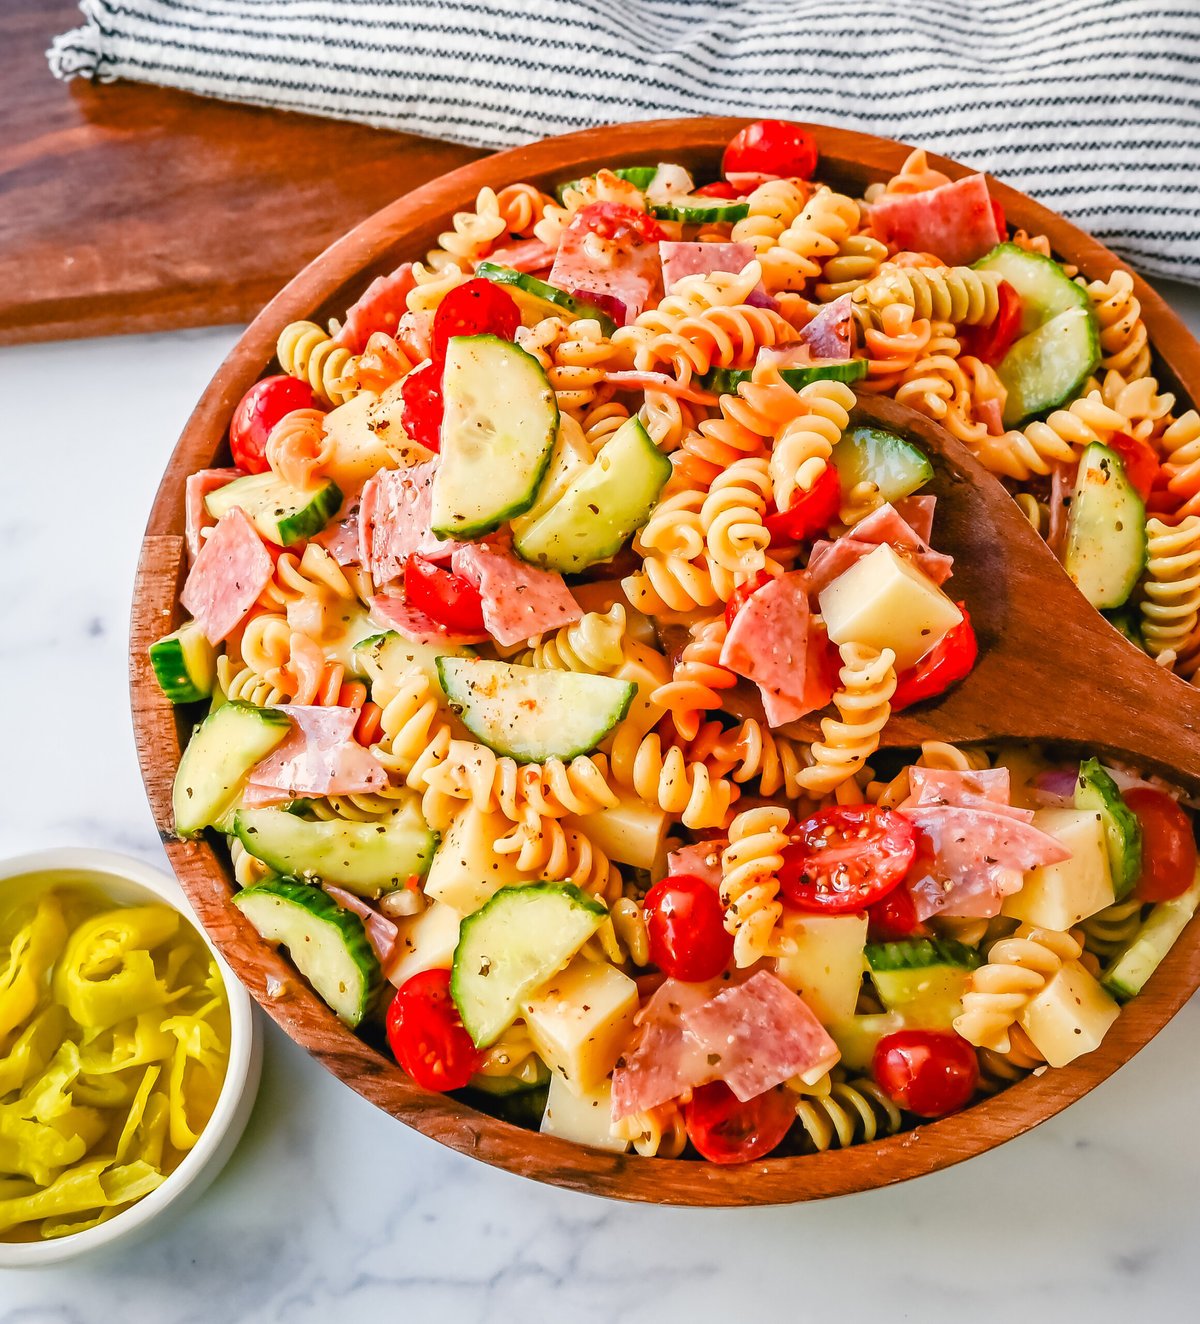 Easy Pasta Salad. This Quick and Easy Pasta Salad Recipe is made with pasta, fresh vegetables, cheese, salami, all tossed with a secret ingredient and Olive Garden Italian dressing. It is the best pasta salad recipe and the most flavorful side dish.